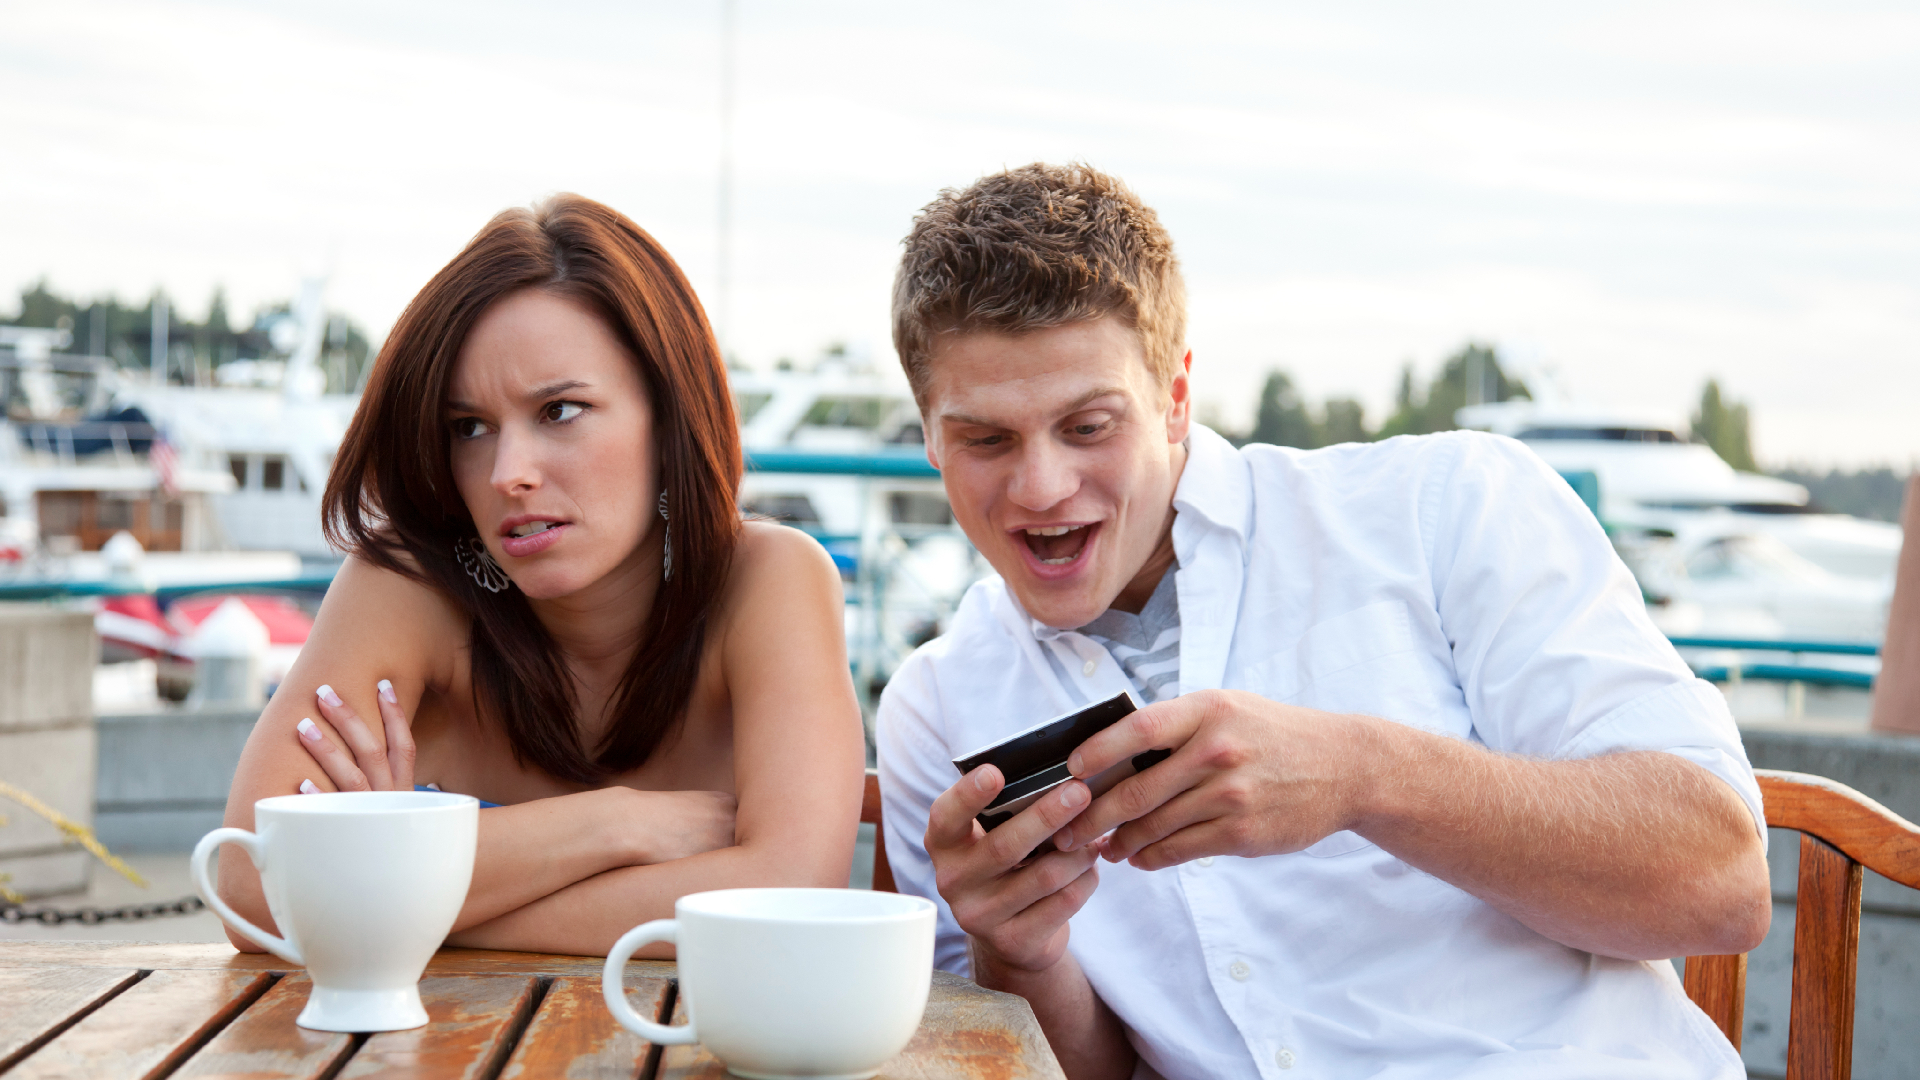 Stock art of a couple on a bad date - Getty